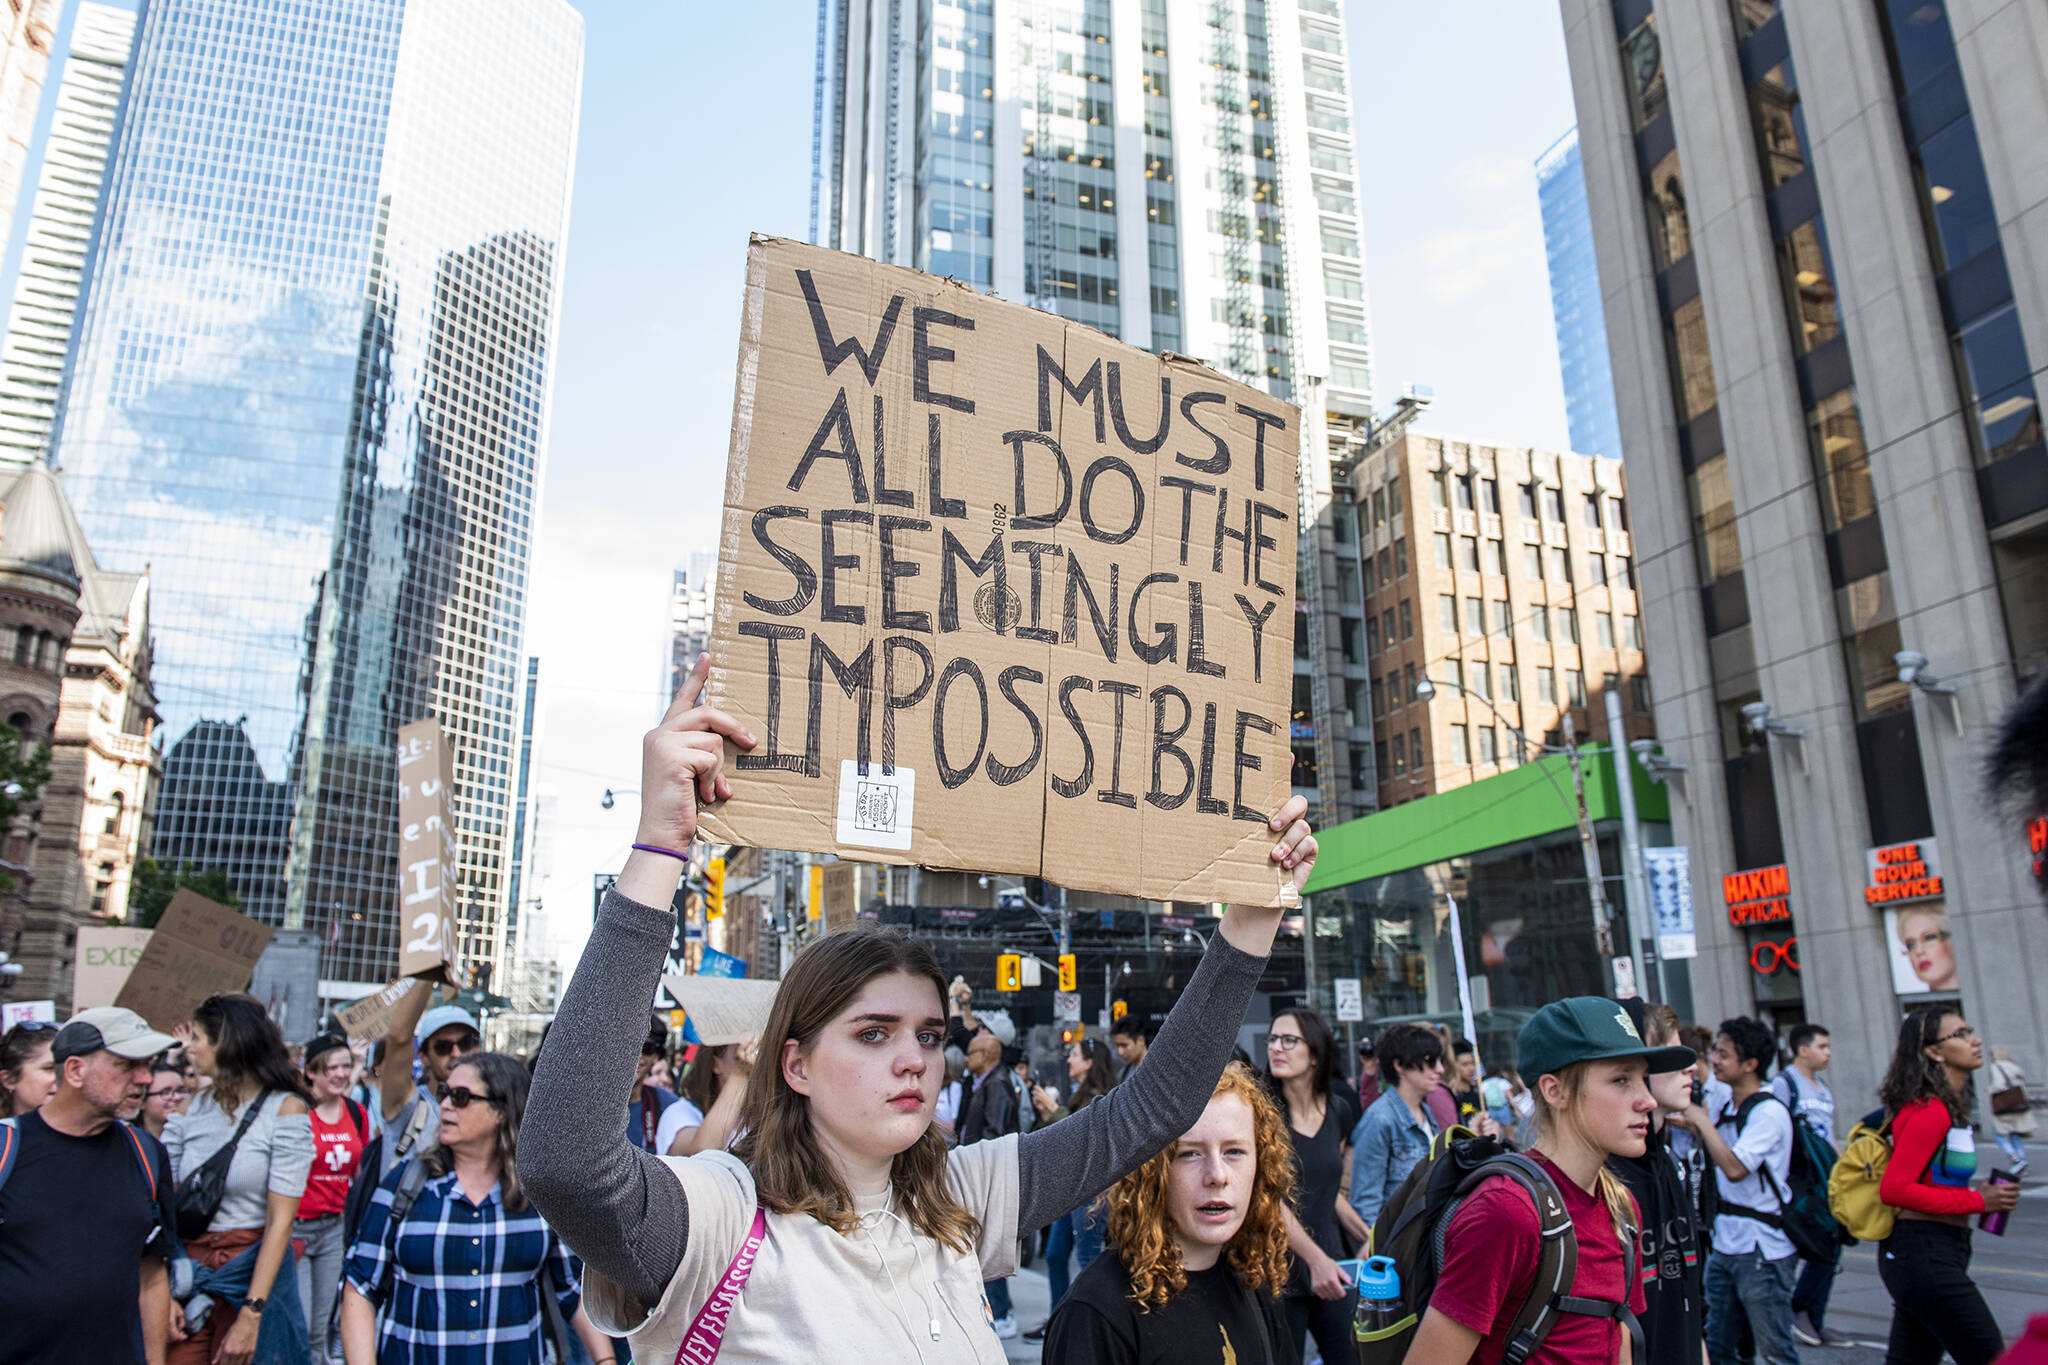 This is what the Global Climate Strike looked like in Toronto